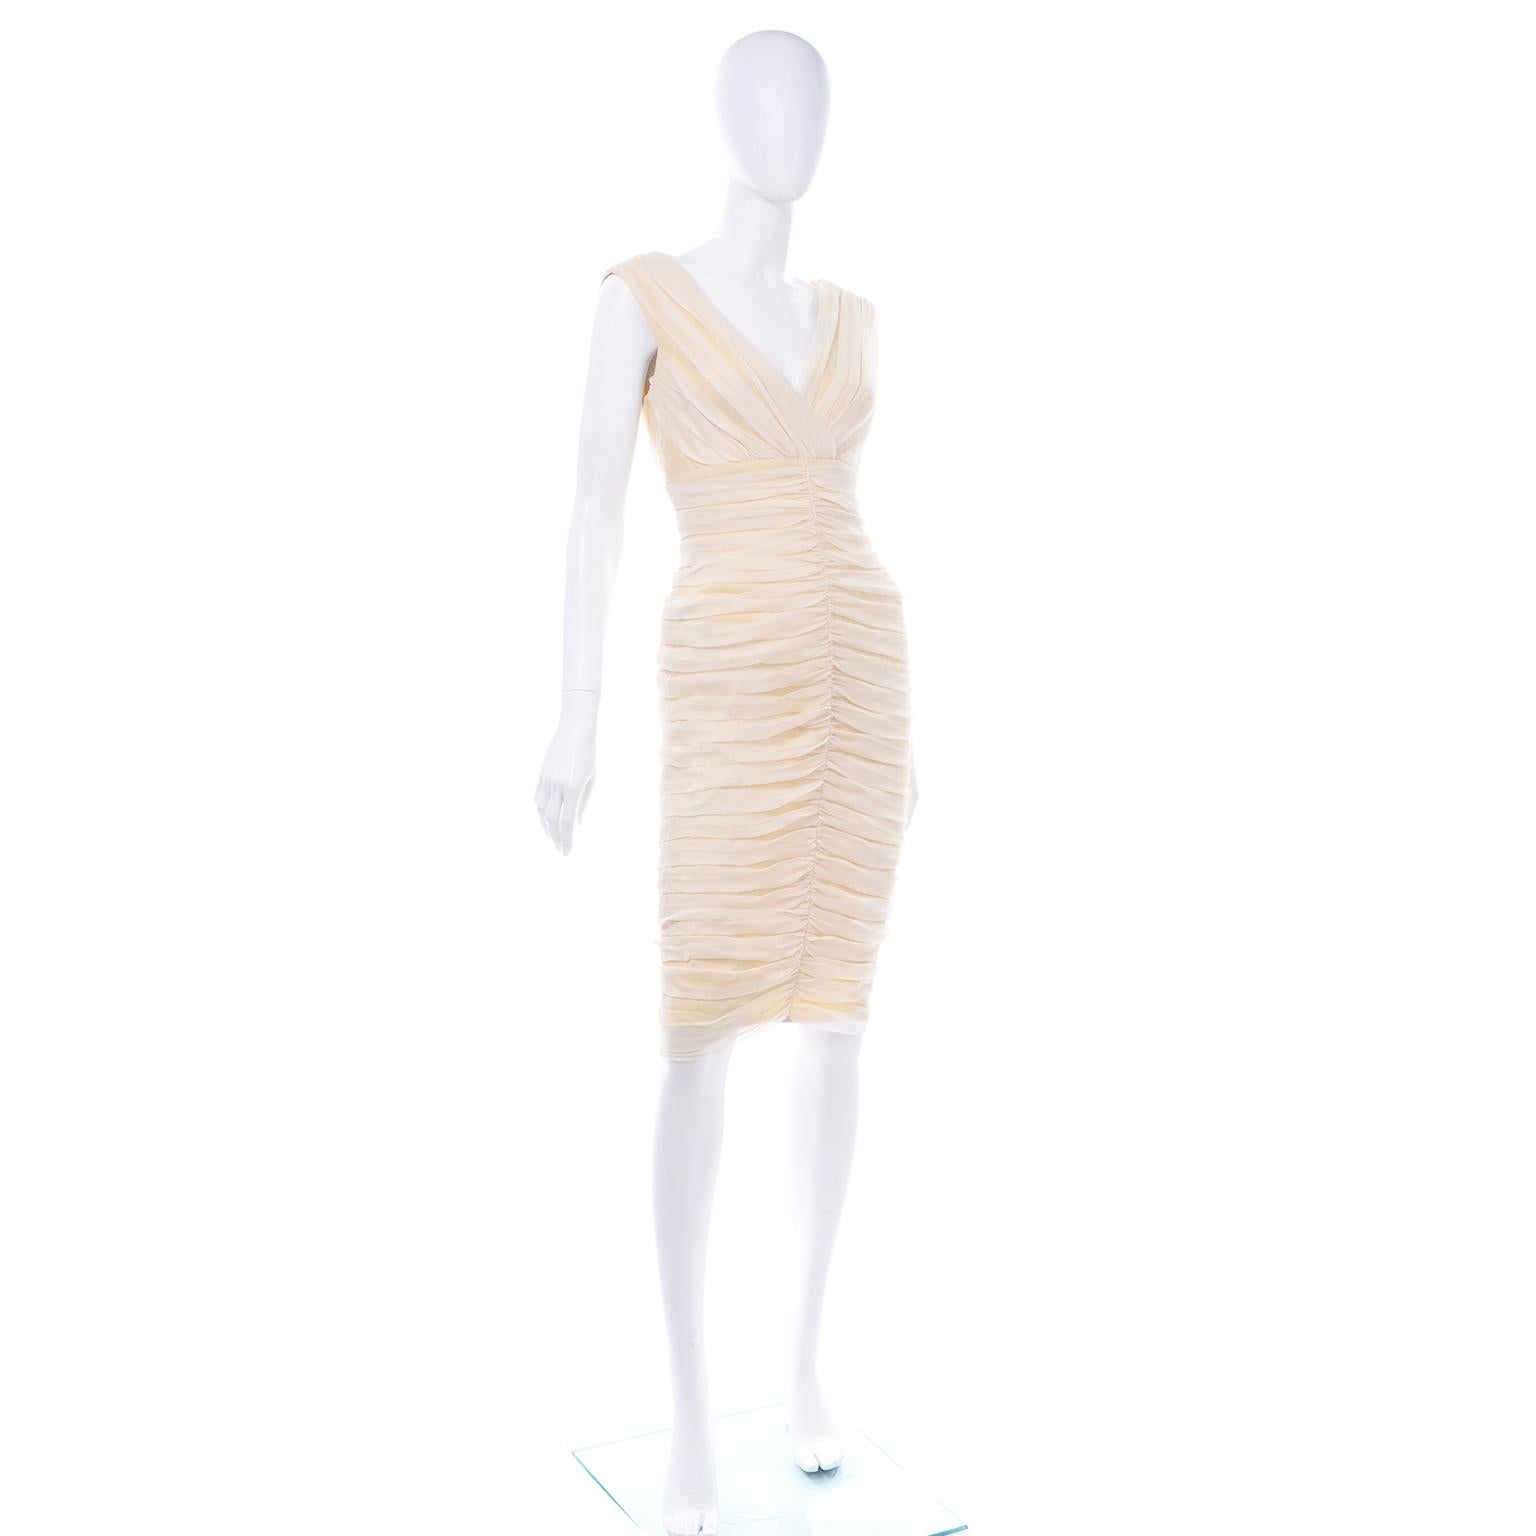 Tadashi Ruched Cream Bodycon Vintage Dress In Excellent Condition For Sale In Portland, OR